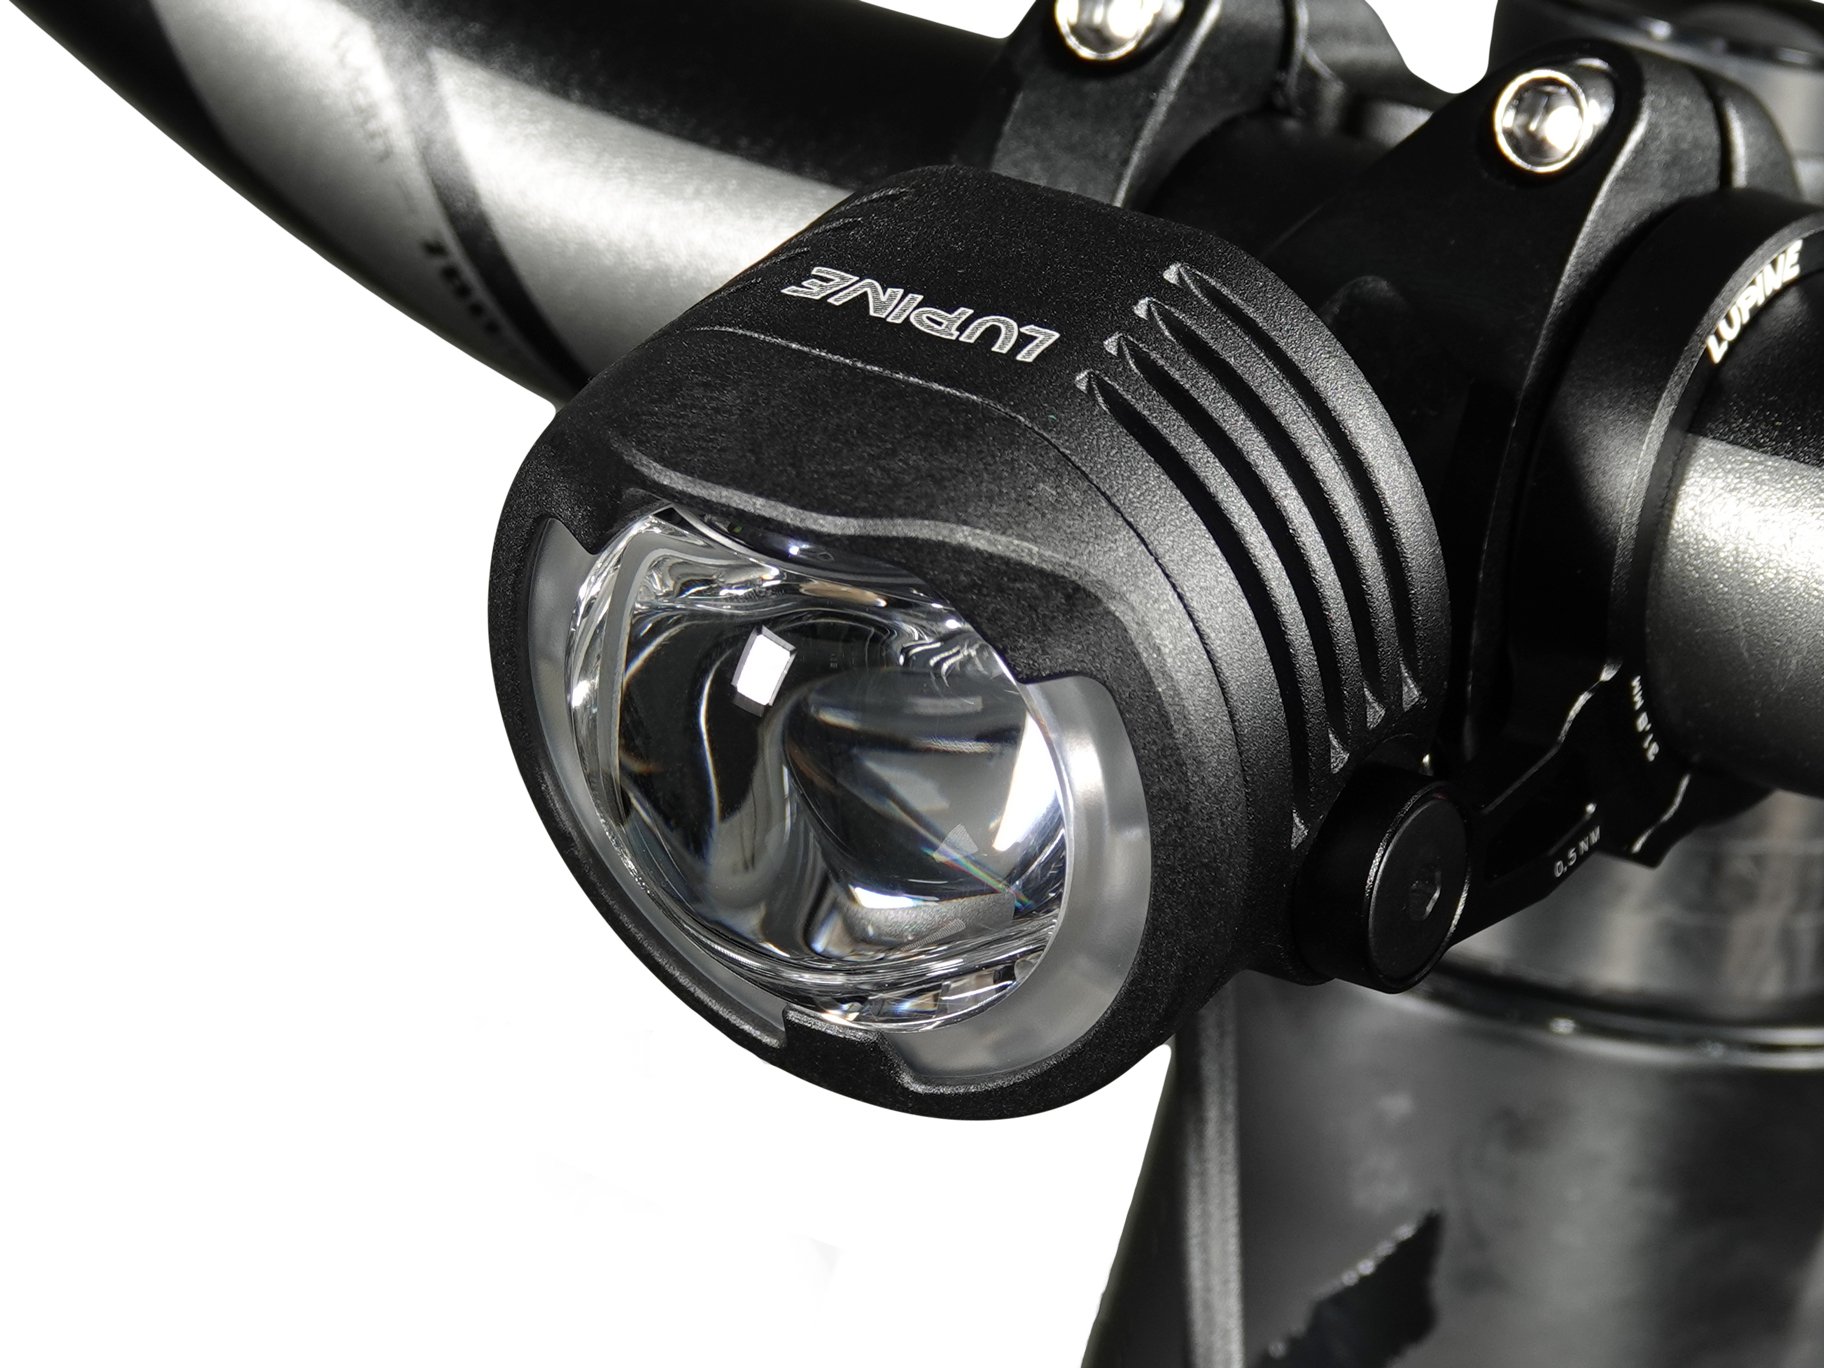 Lupine SL SF / Brose - the SL F Hi-beam - for e-bikes with drive systems. NOW ALSO SUITABLE FOR MAG S DRIVES! - Lupine Lighting Systems